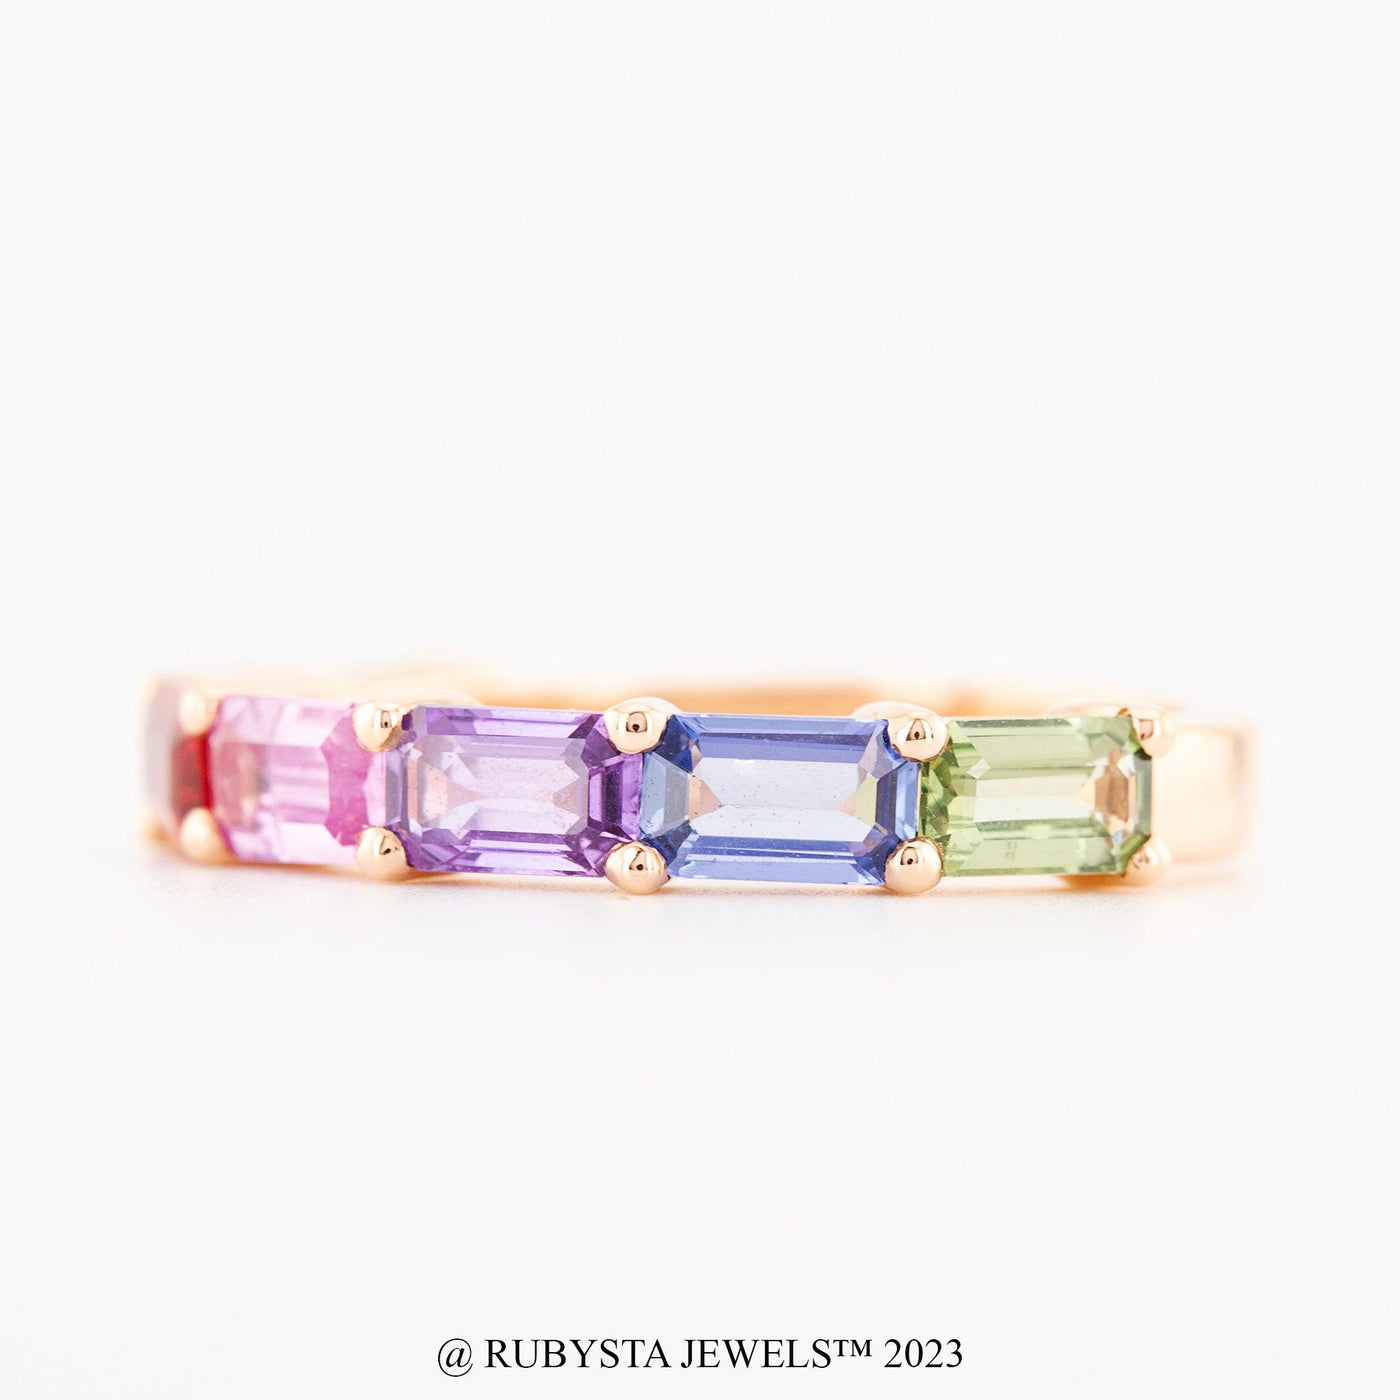 Rainbow Sapphire Jewelry - Perfect Gifts for Birthdays, Anniversaries, Baby Shower, and Special Occasions Gemstone Ring Sapphire ring - Rubysta